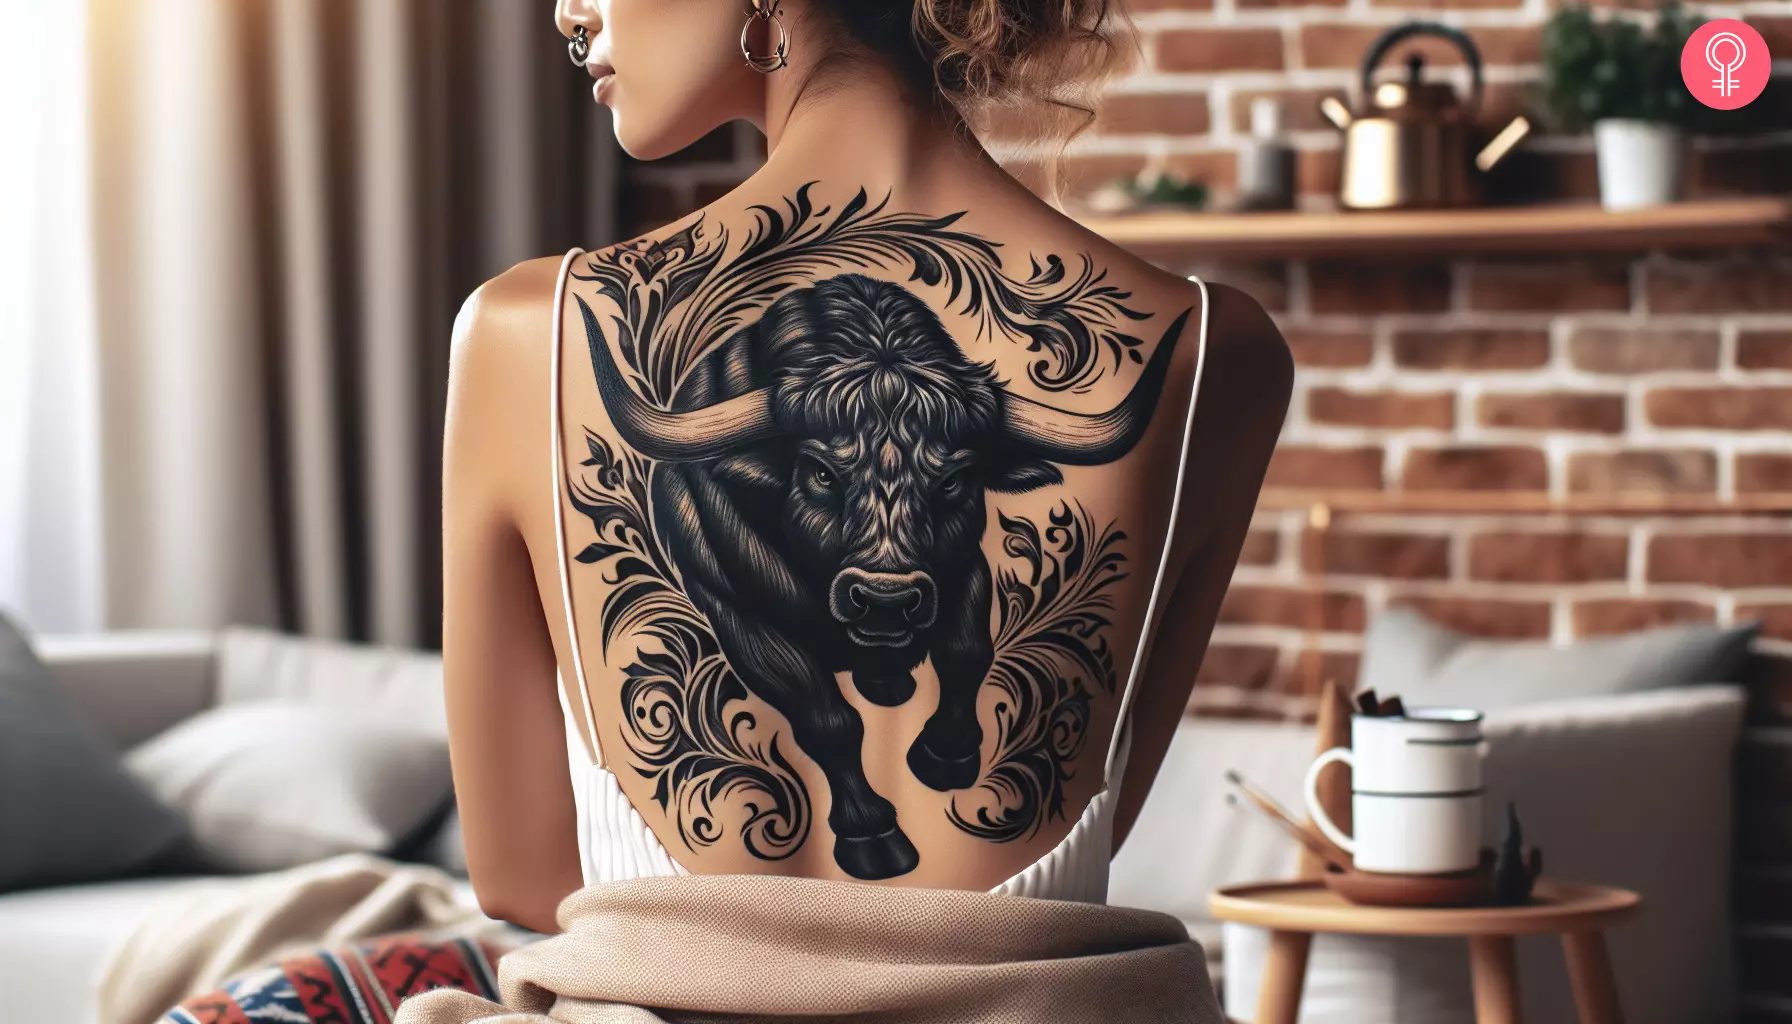 A charging bull tattoo on a woman’s back